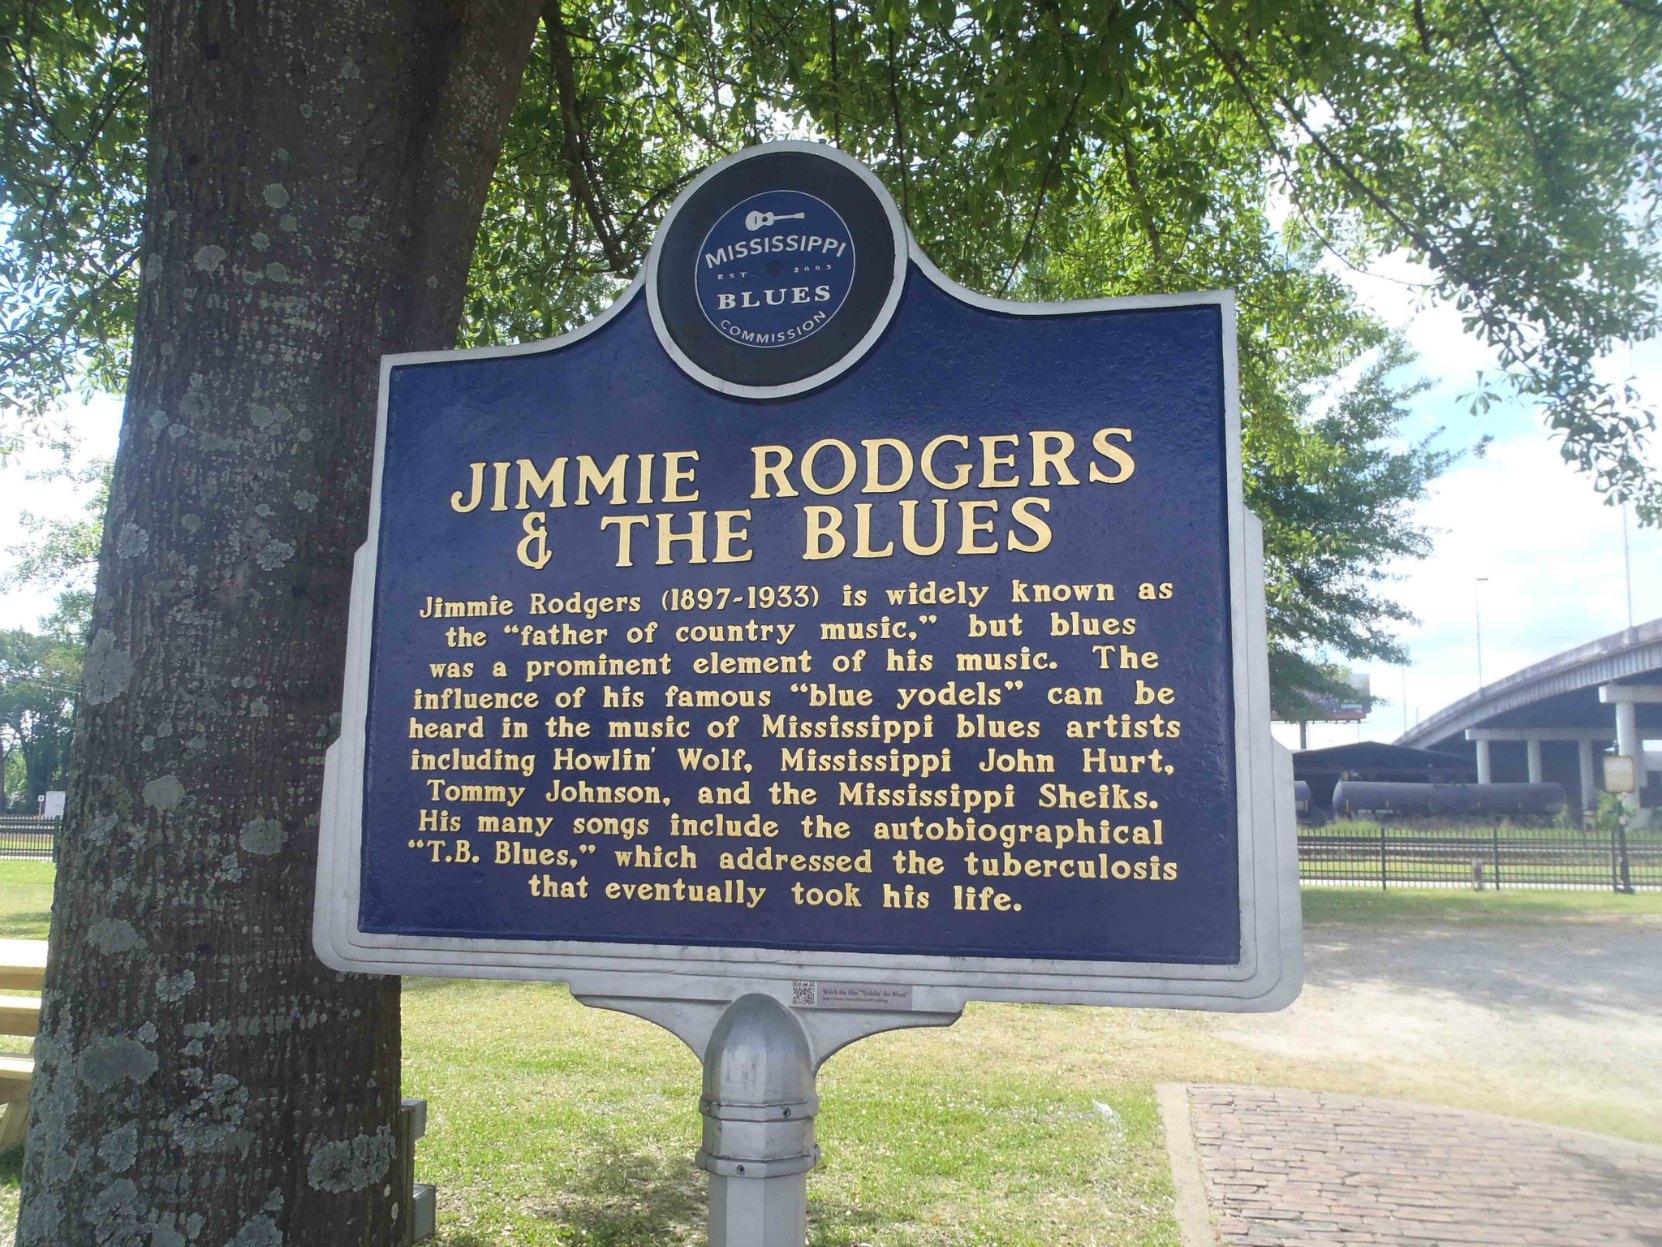 Mississippi Blues Trail marker for Jimmie Rodgers, near the old Rail Depot in Meridian, Mississippi,